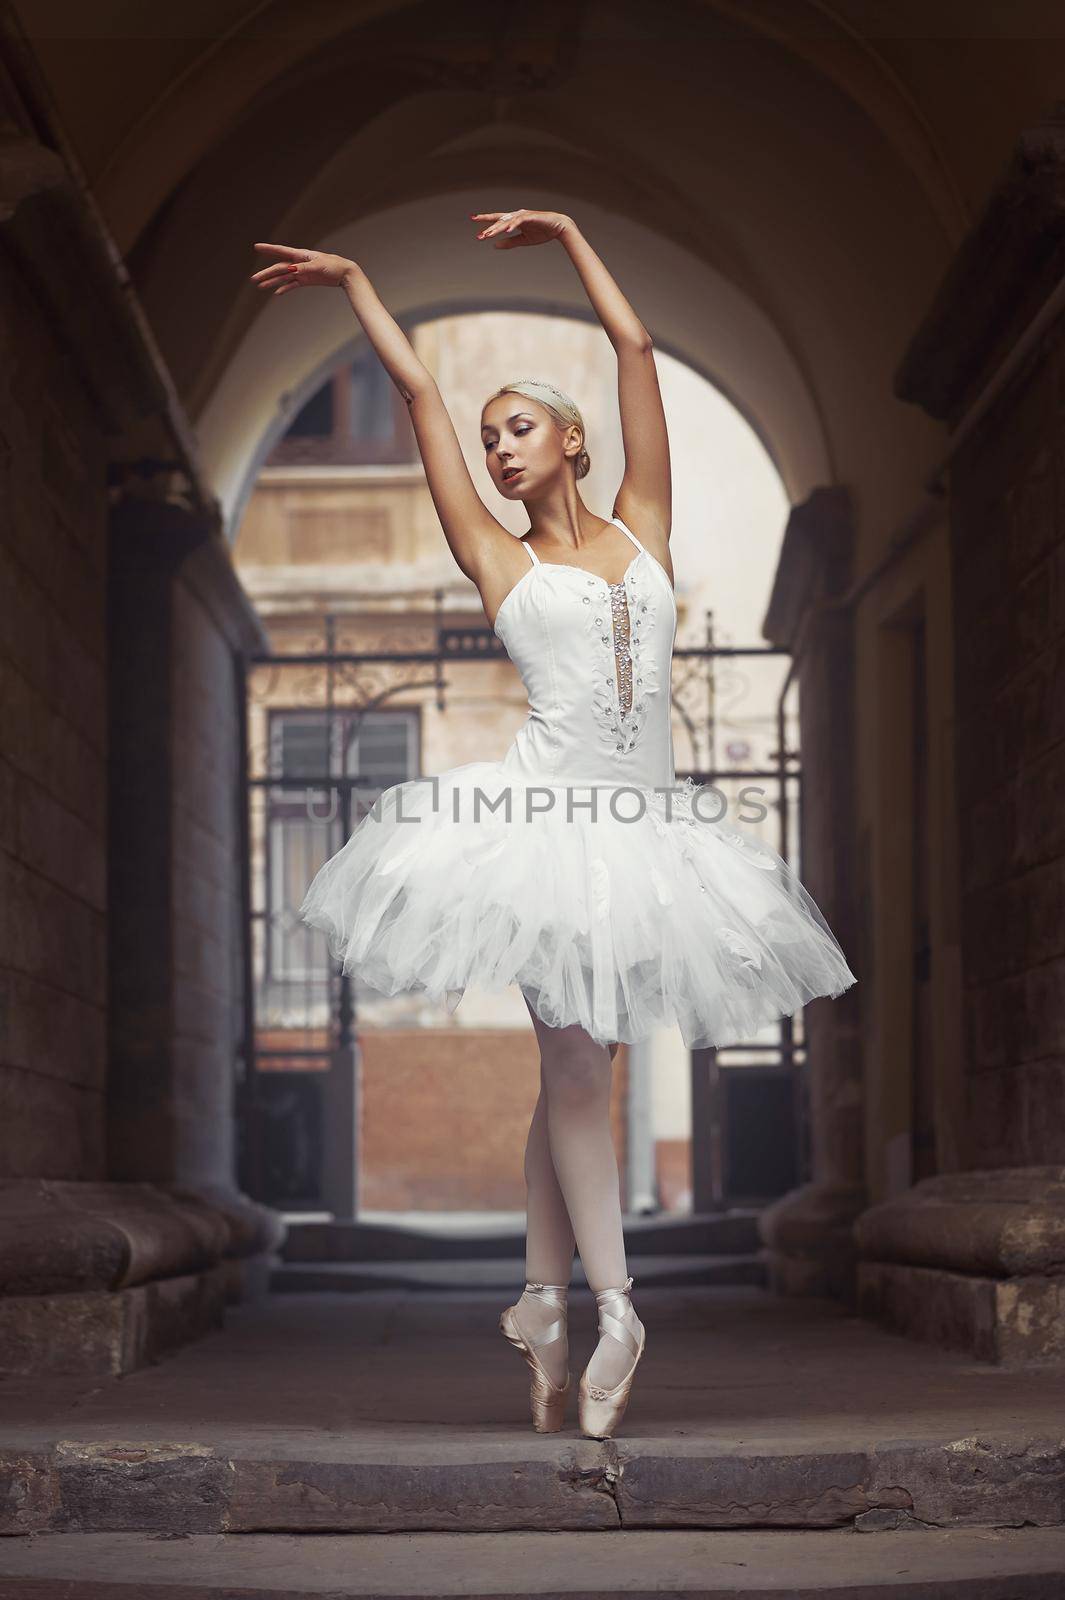 Working on her posture. Young ballerina performing on the streets of her city